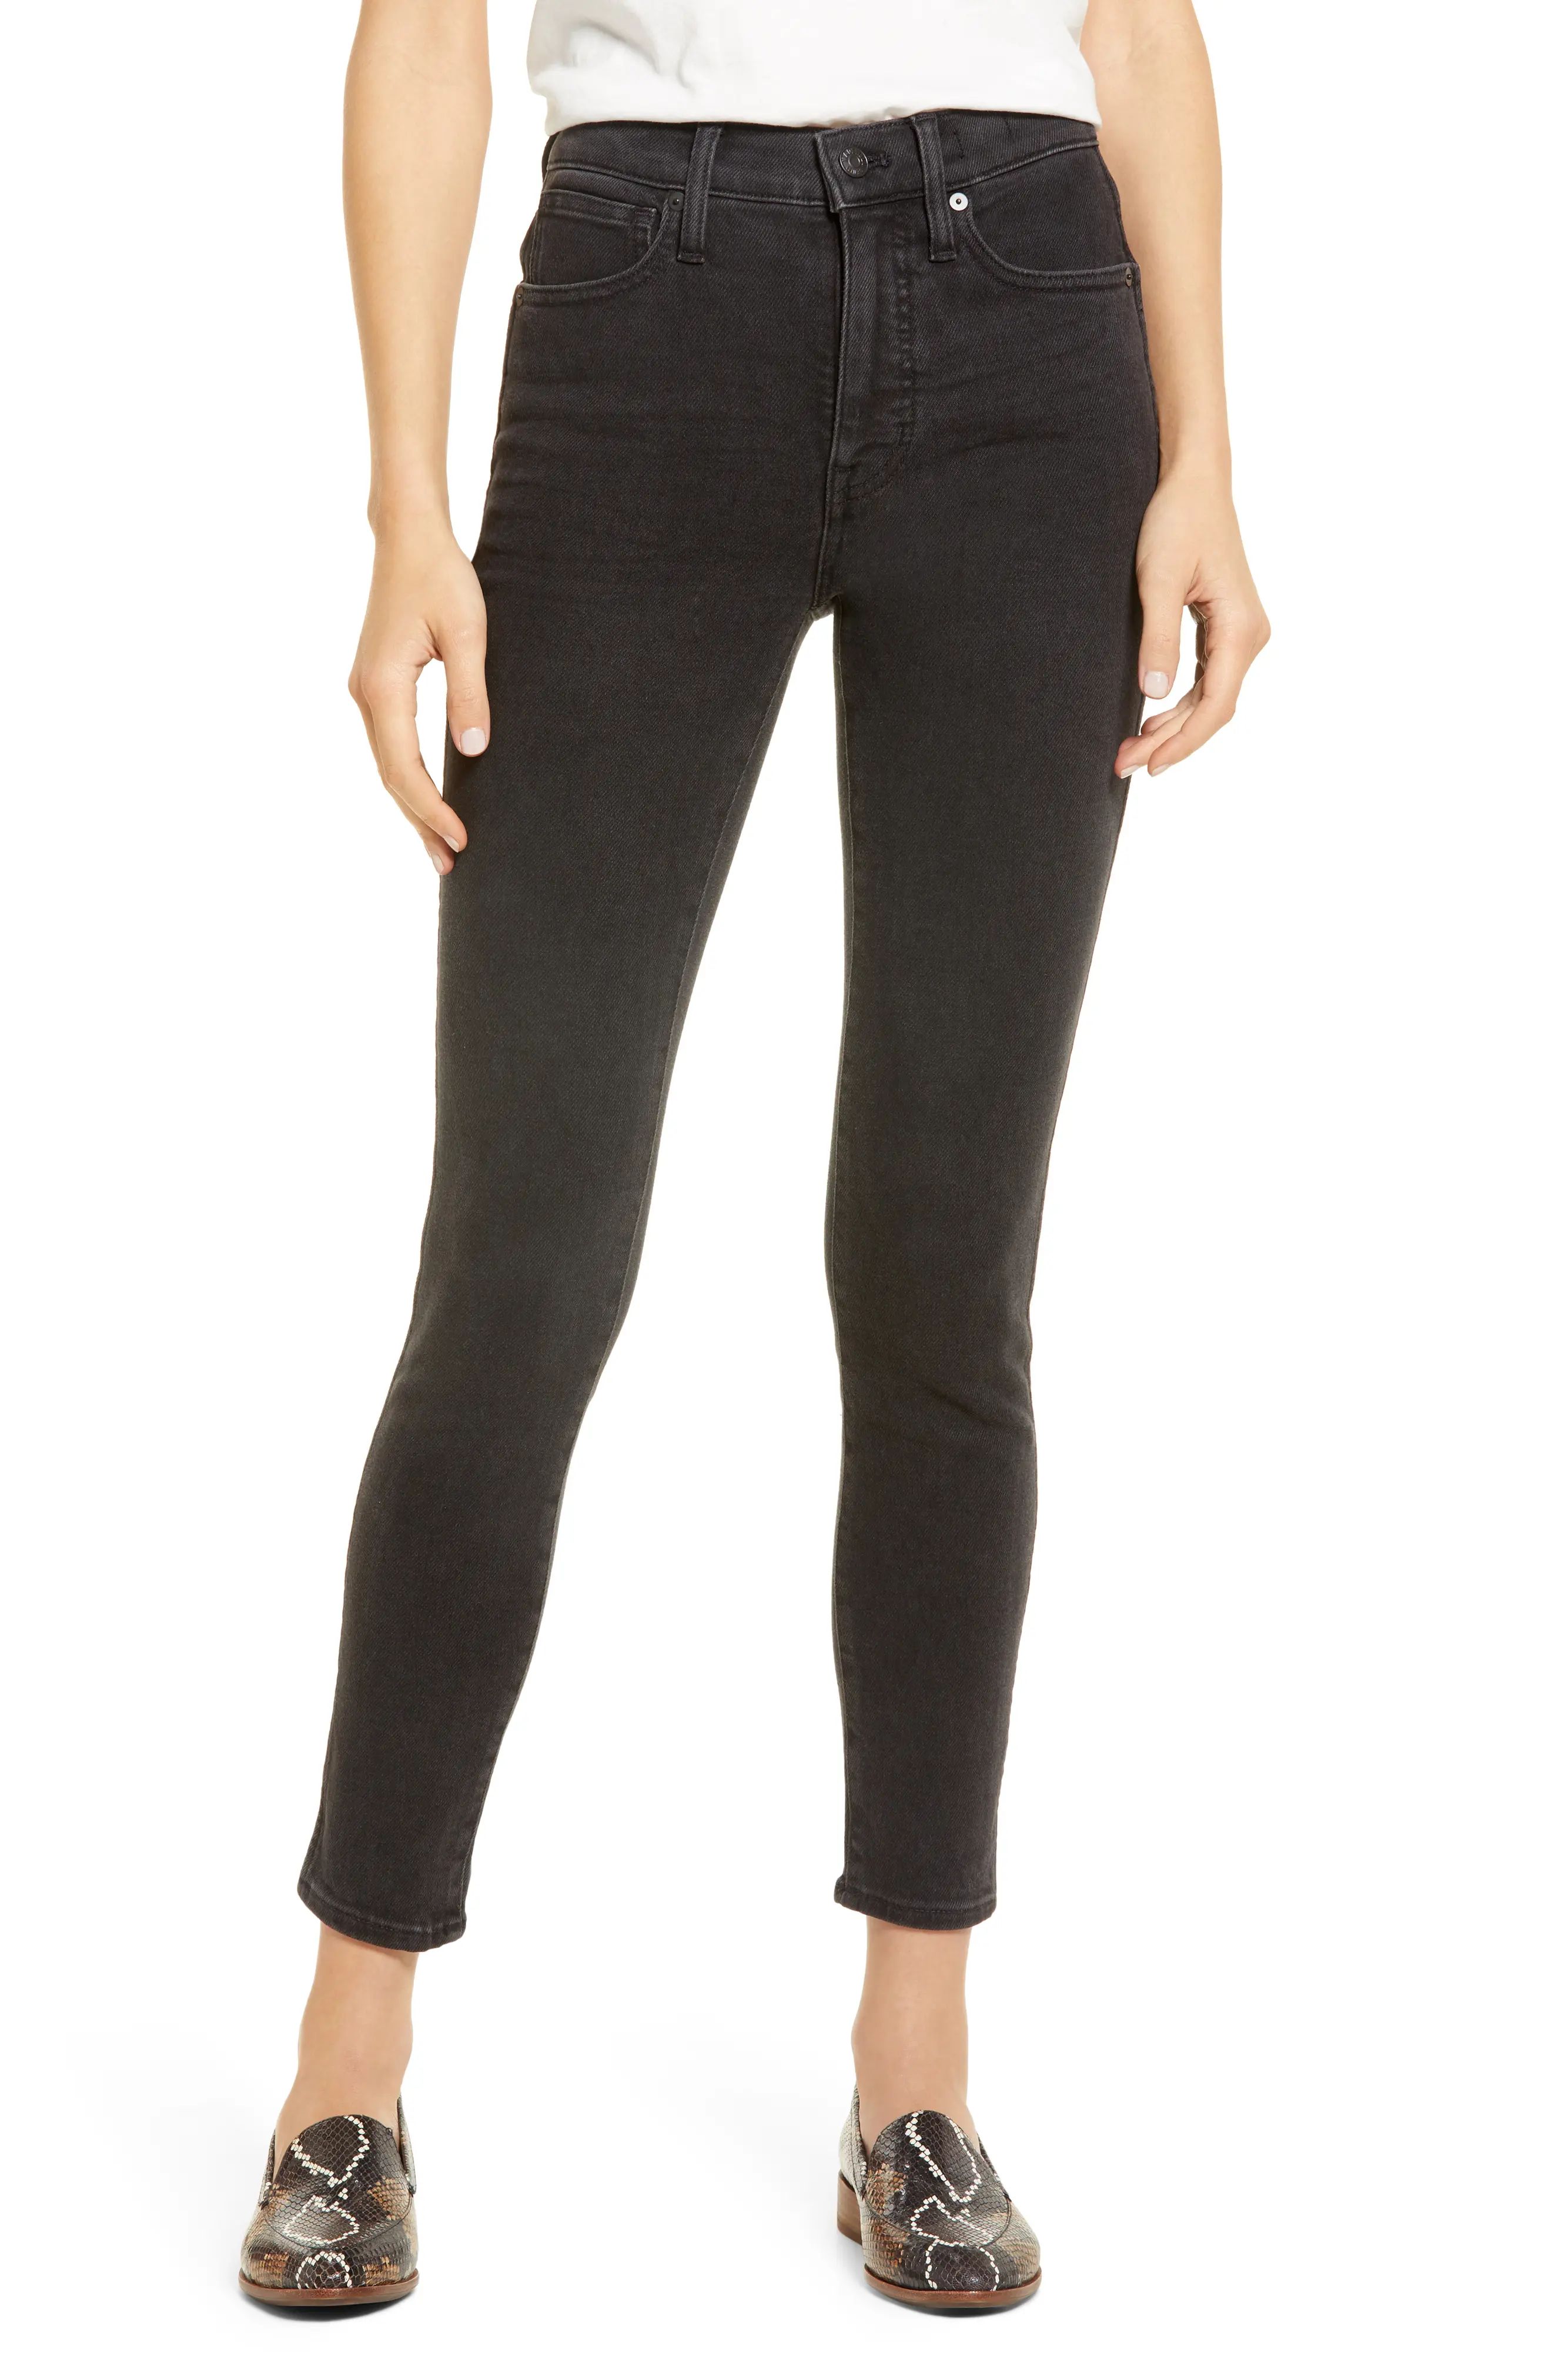 Women's Madewell 10-Inch High Waist Ankle Skinny Jeans, Size 30 - Black | Nordstrom